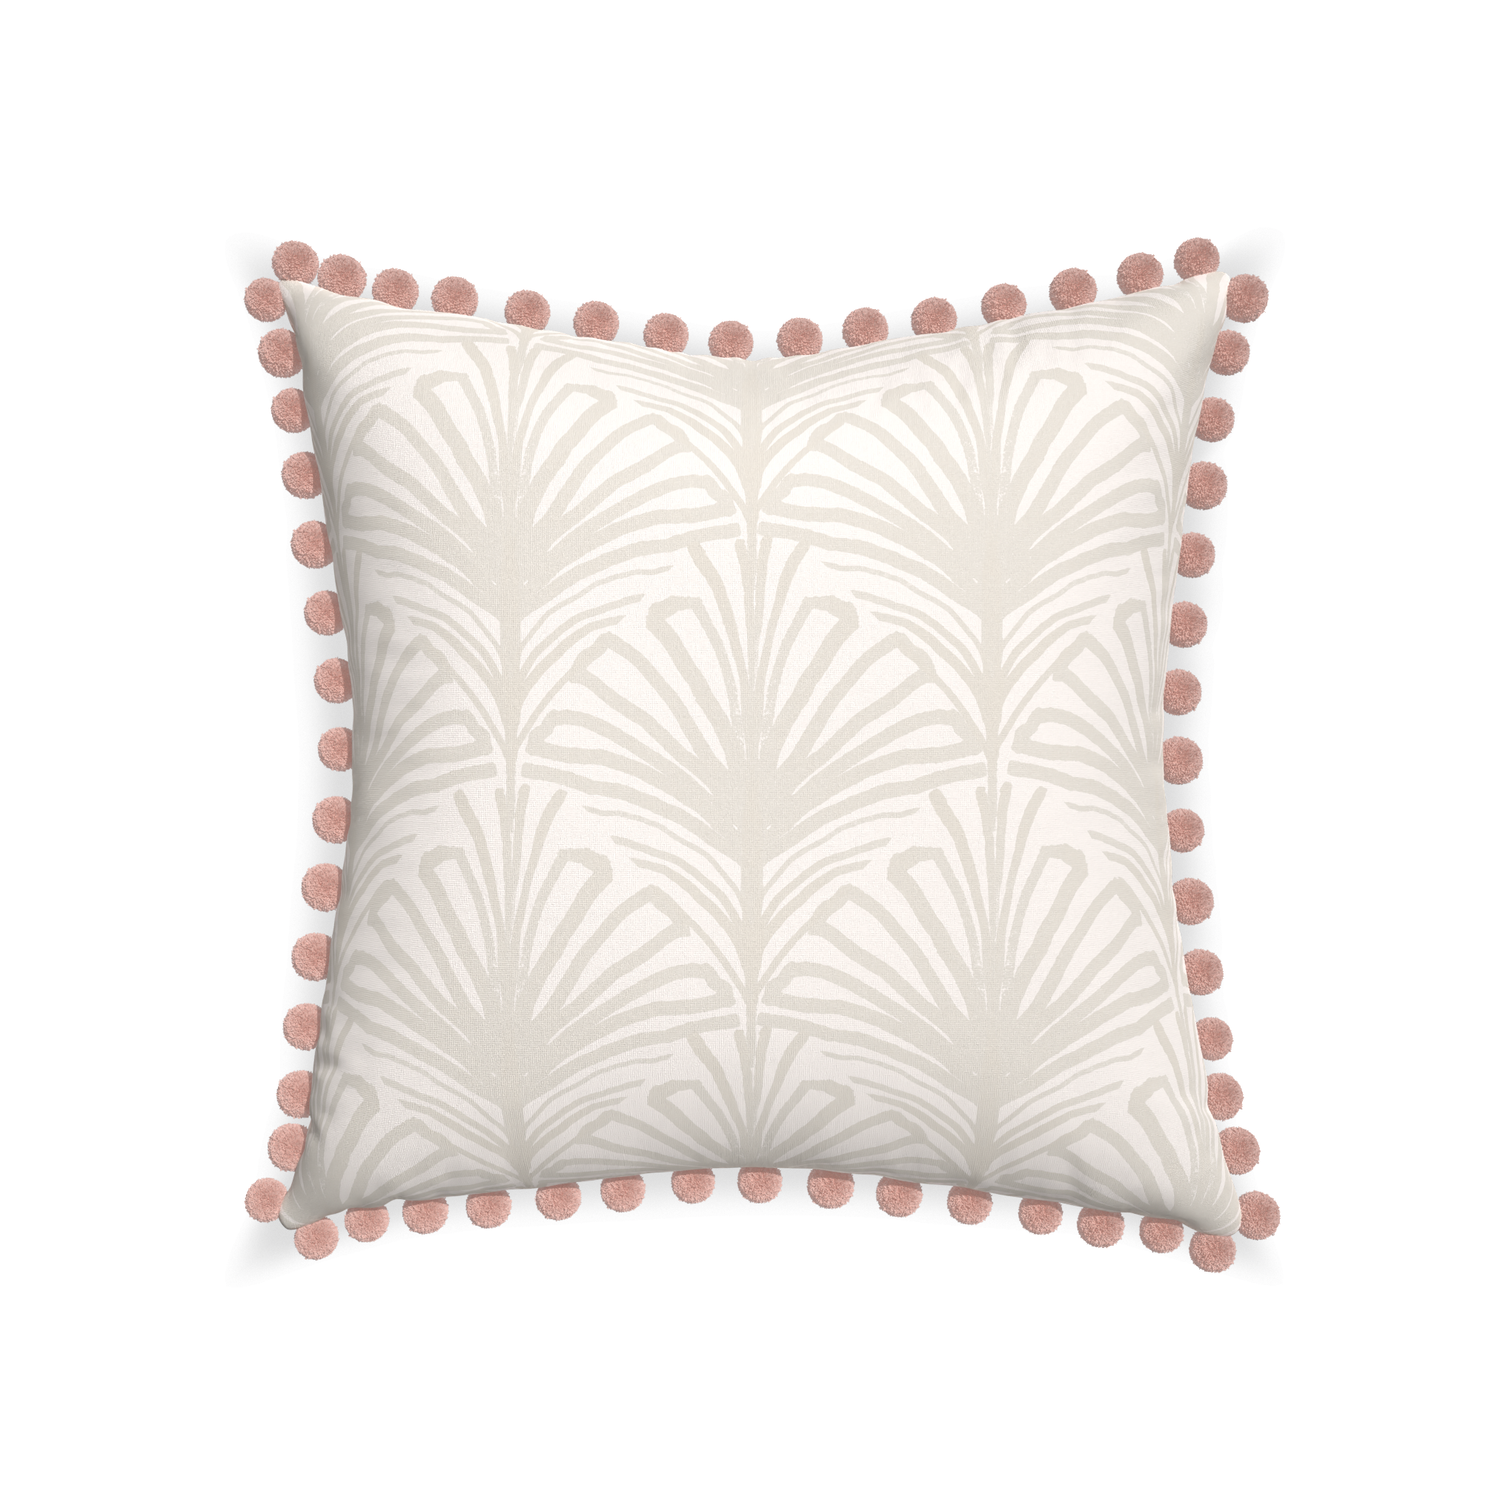 22-square suzy sand custom beige palmpillow with rose pom pom on white background